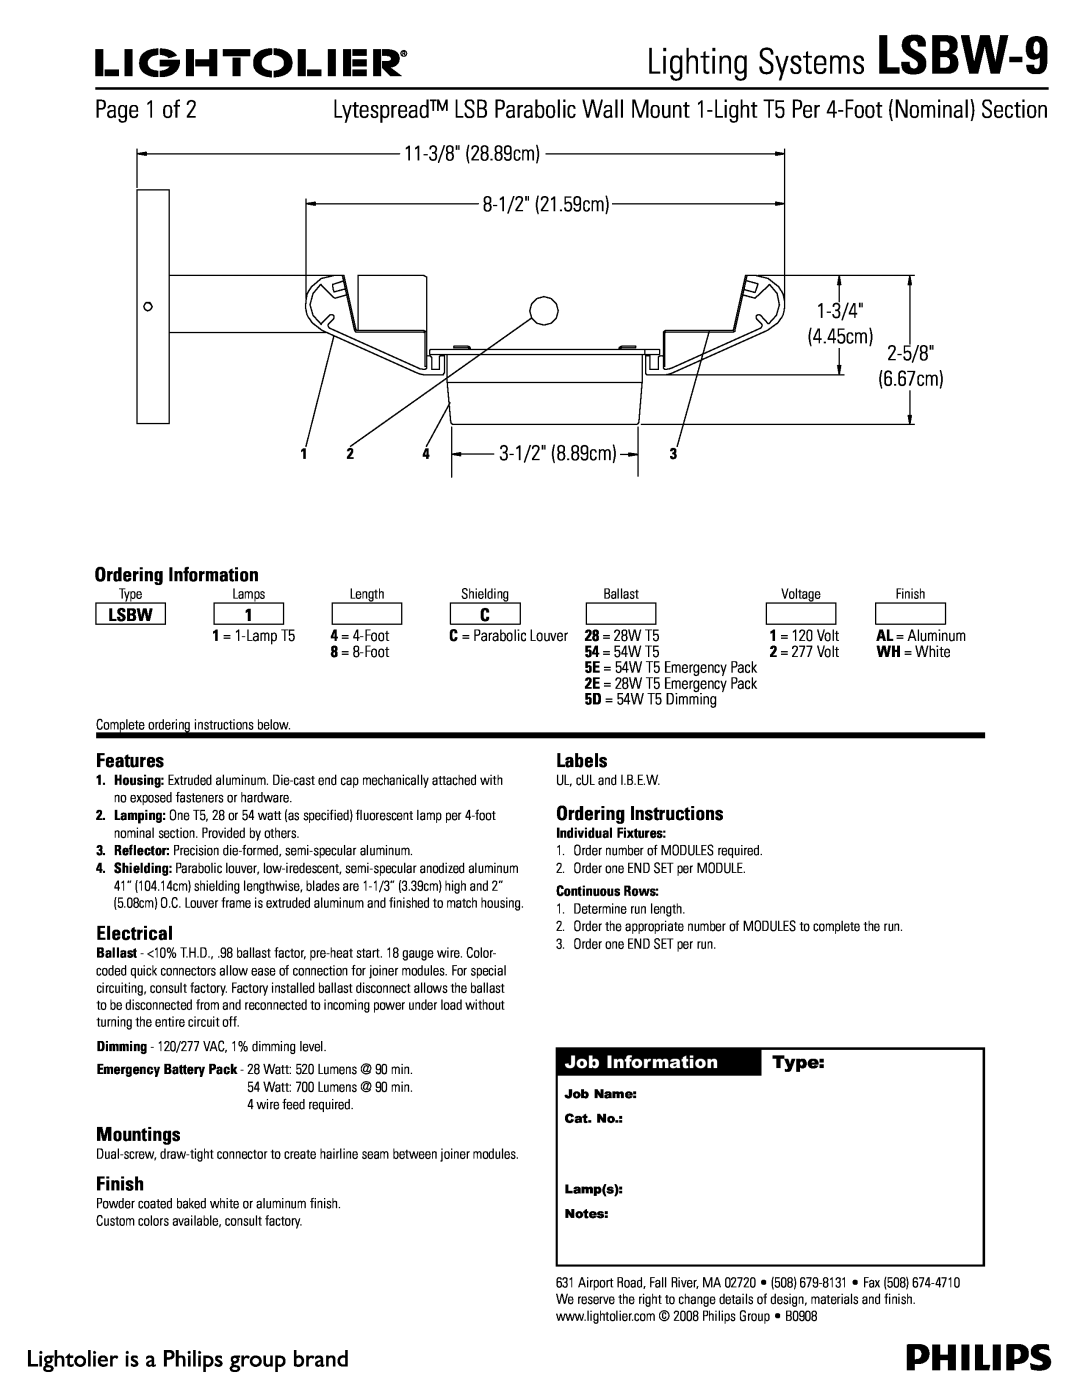 Lightolier manual Lighting Systems LSBW-9, Ordering Information, Features, Electrical, Mountings, Finish, Labels, Type 